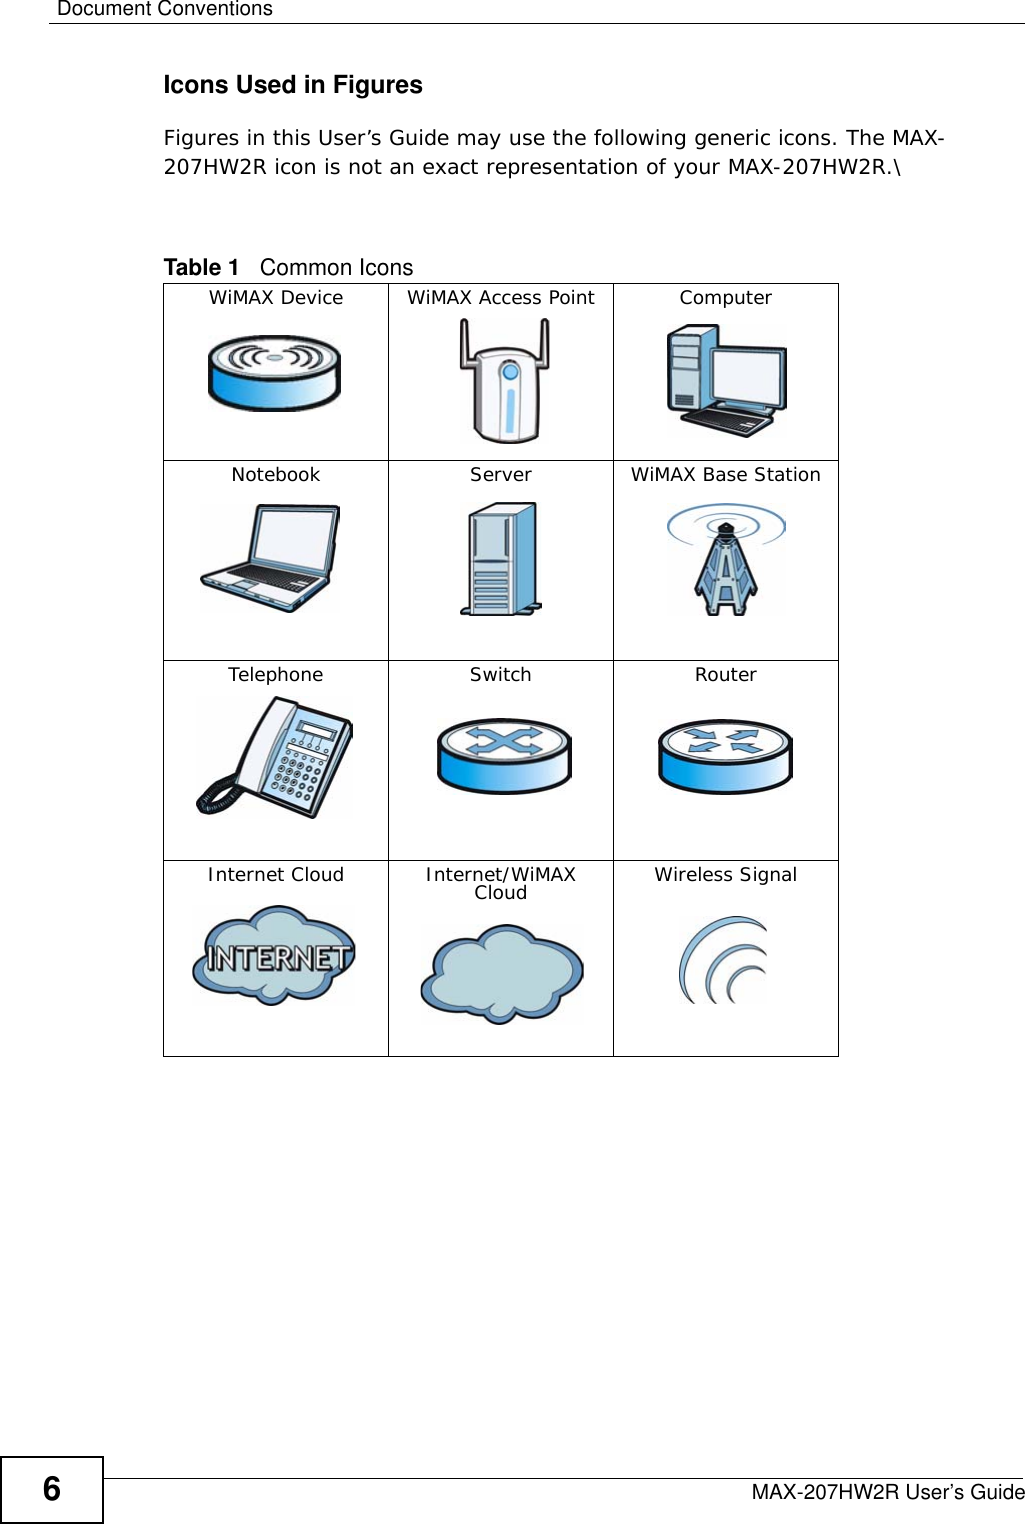 Document ConventionsMAX-207HW2R User’s Guide6Icons Used in FiguresFigures in this User’s Guide may use the following generic icons. The MAX-207HW2R icon is not an exact representation of your MAX-207HW2R.\Table 1   Common IconsWiMAX Device WiMAX Access Point ComputerNotebook Server WiMAX Base StationTelephone Switch RouterInternet Cloud Internet/WiMAX Cloud Wireless Signal